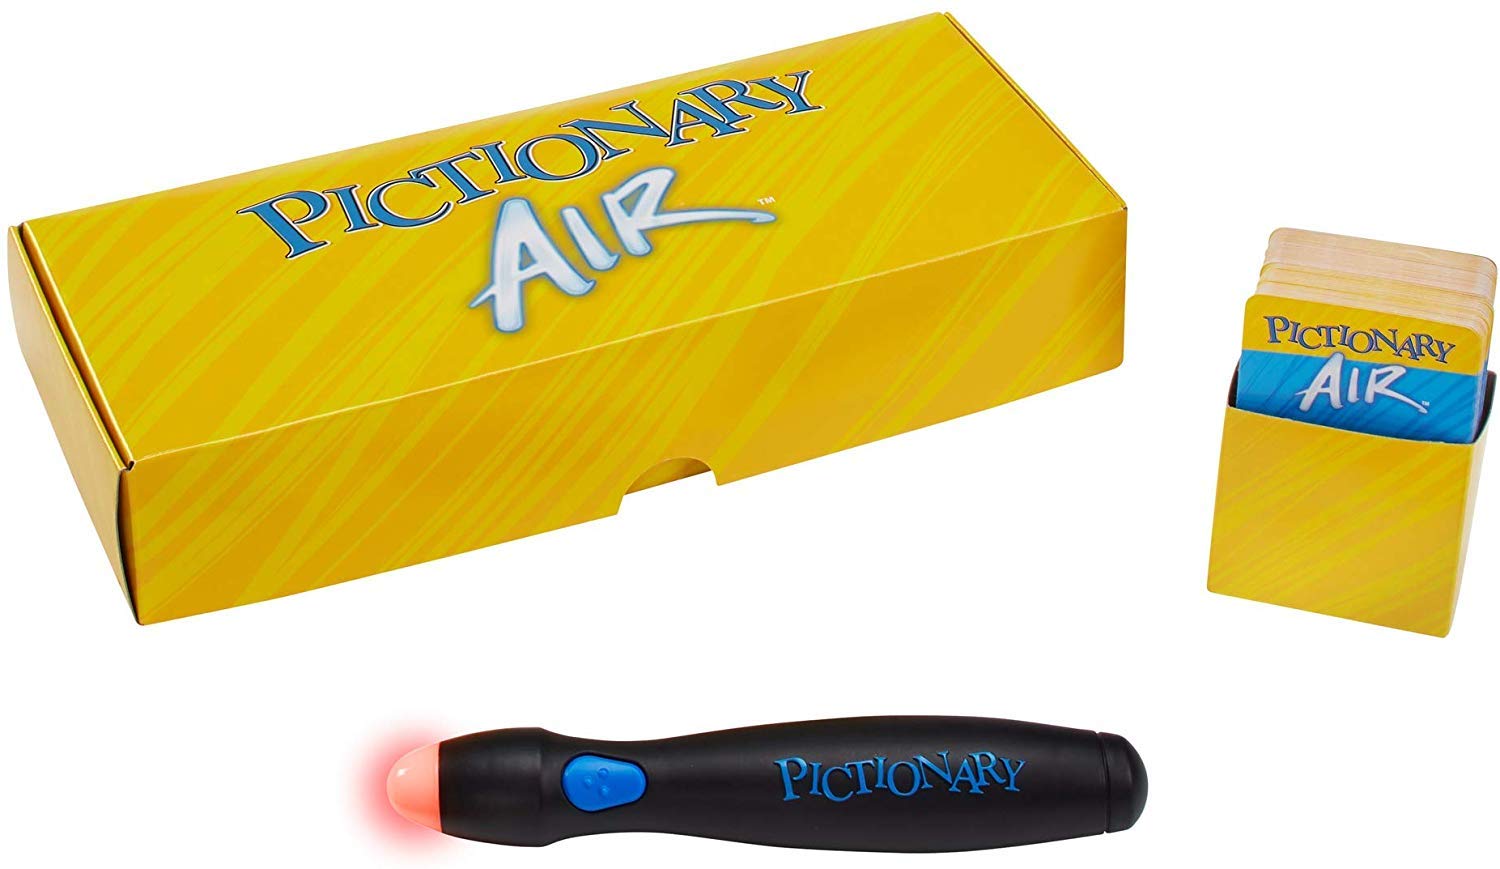 Pictionary Air Drawing Game, Family Game with Light-up Pen and Clue Cards, Links to Smart Devices, Makes a Great Gift for 8 Year Olds and up [Amazon Exclusive]